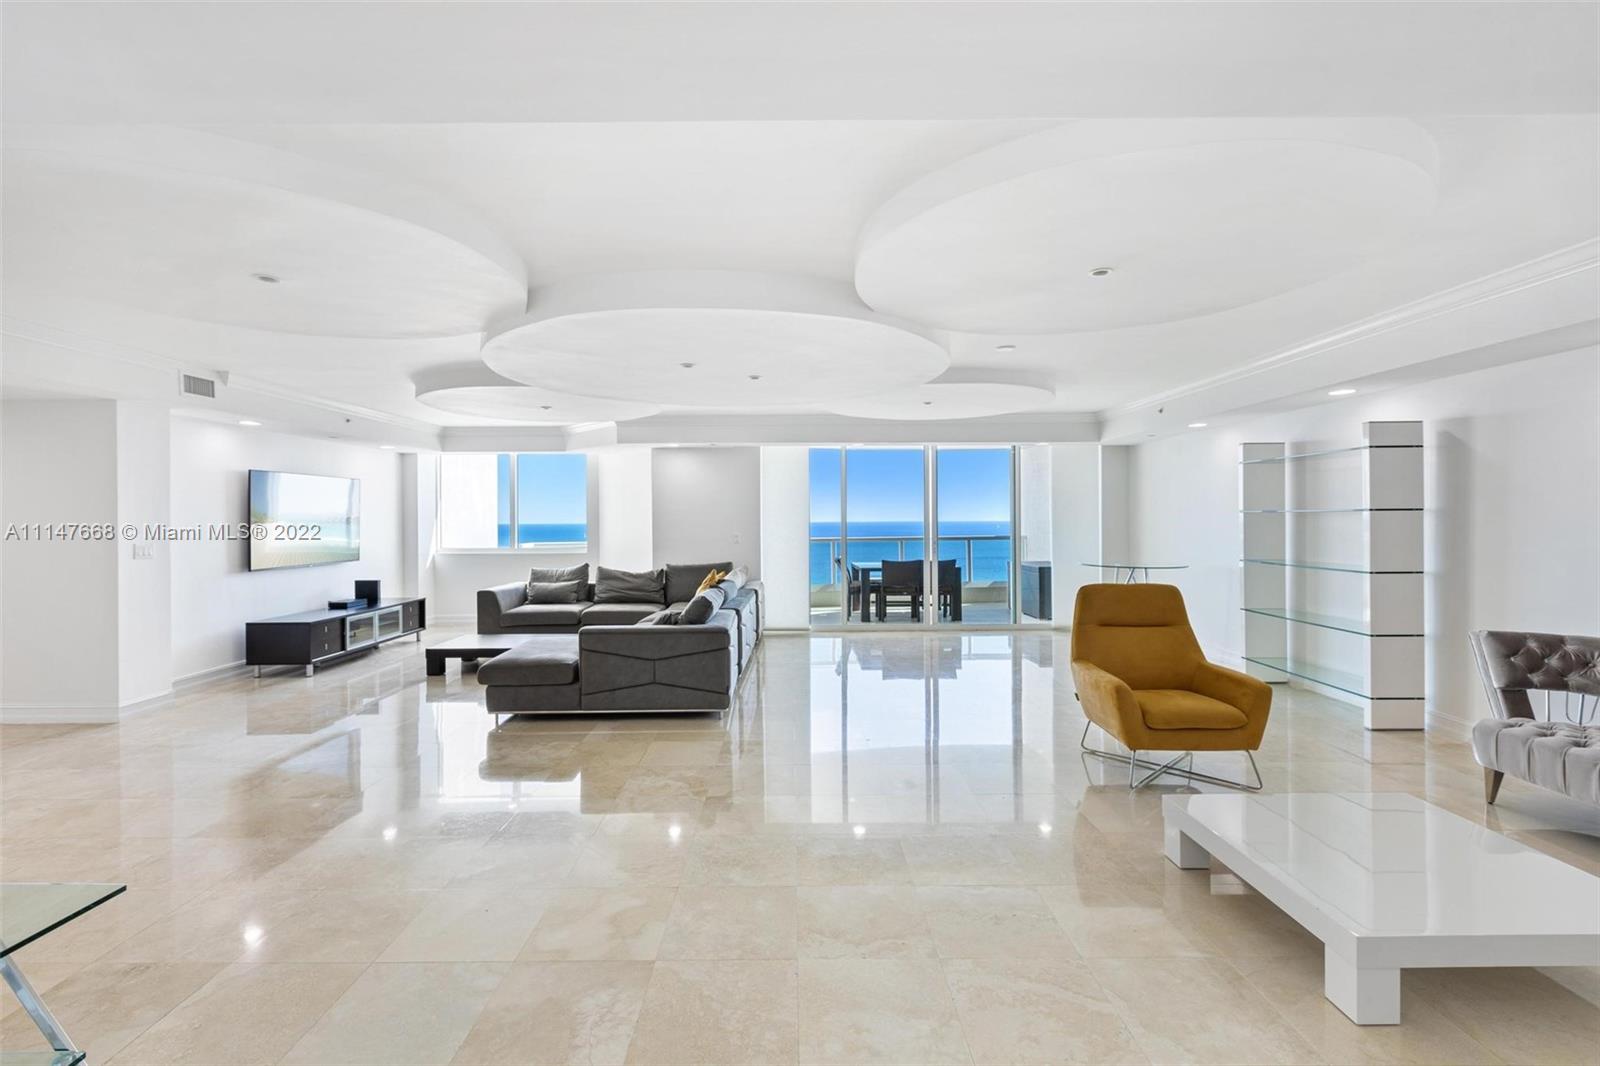 Amazing Unique Double Unit in one of the most desirable building in Aventura. Unit 2606 and 2607 combined for a  large 5,953 SF (6 Beds + 5.5 Baths), incredible unobstructed ocean and skyline views from the 26th Floor. Extra large master suite with balcony with 2 large closets and 2 large baths. Dinning Room for 14 people. A lot of storage spaces, maids quarter, laundry room. Hamptons South is a 5 Star Complex in the Heart of Aventura with great amenities including Tennis Courts, Gym and Restaurant, close to Aventura Mall, House of Worship and great Private and Charter Schools. MUST SEE !!!!